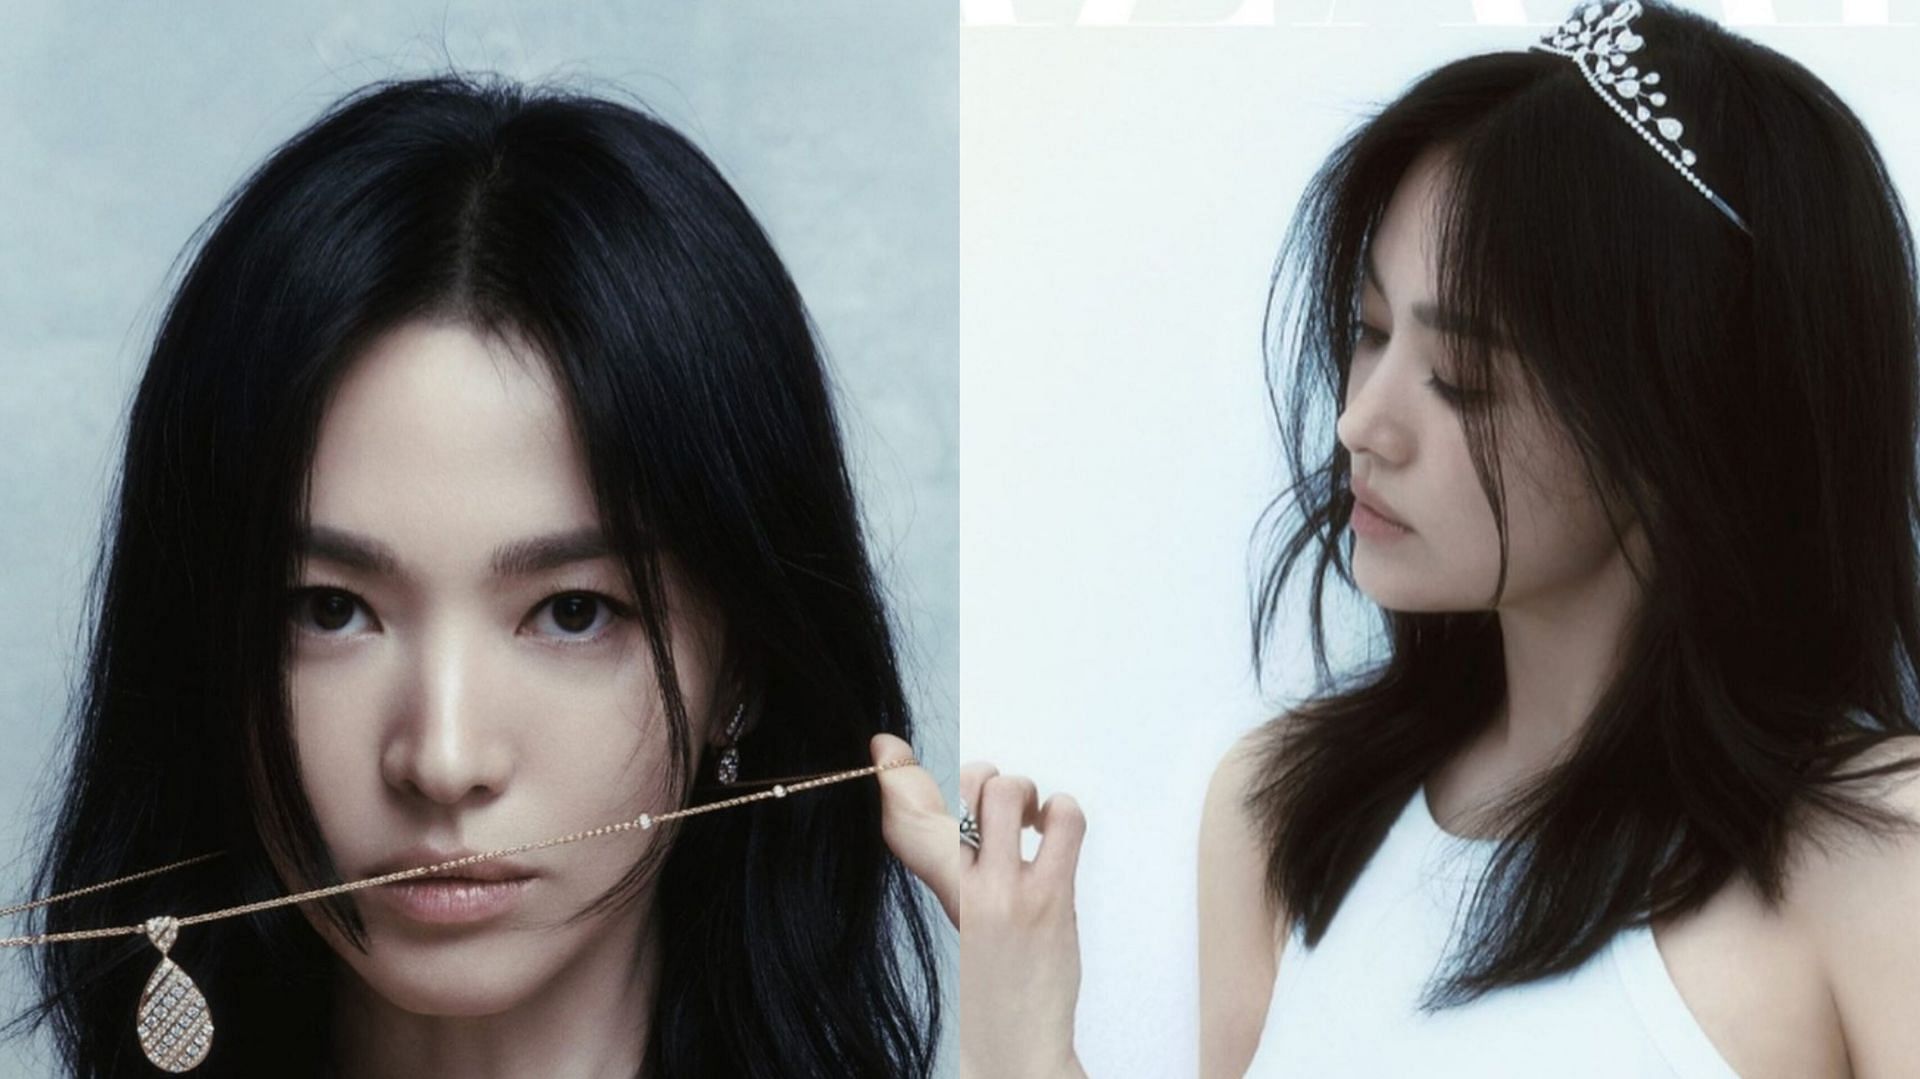 Song Hye-kyo dishes about her upcoming project Dark Nuns in a recent interview (Image via @kyo1122/Instagram)